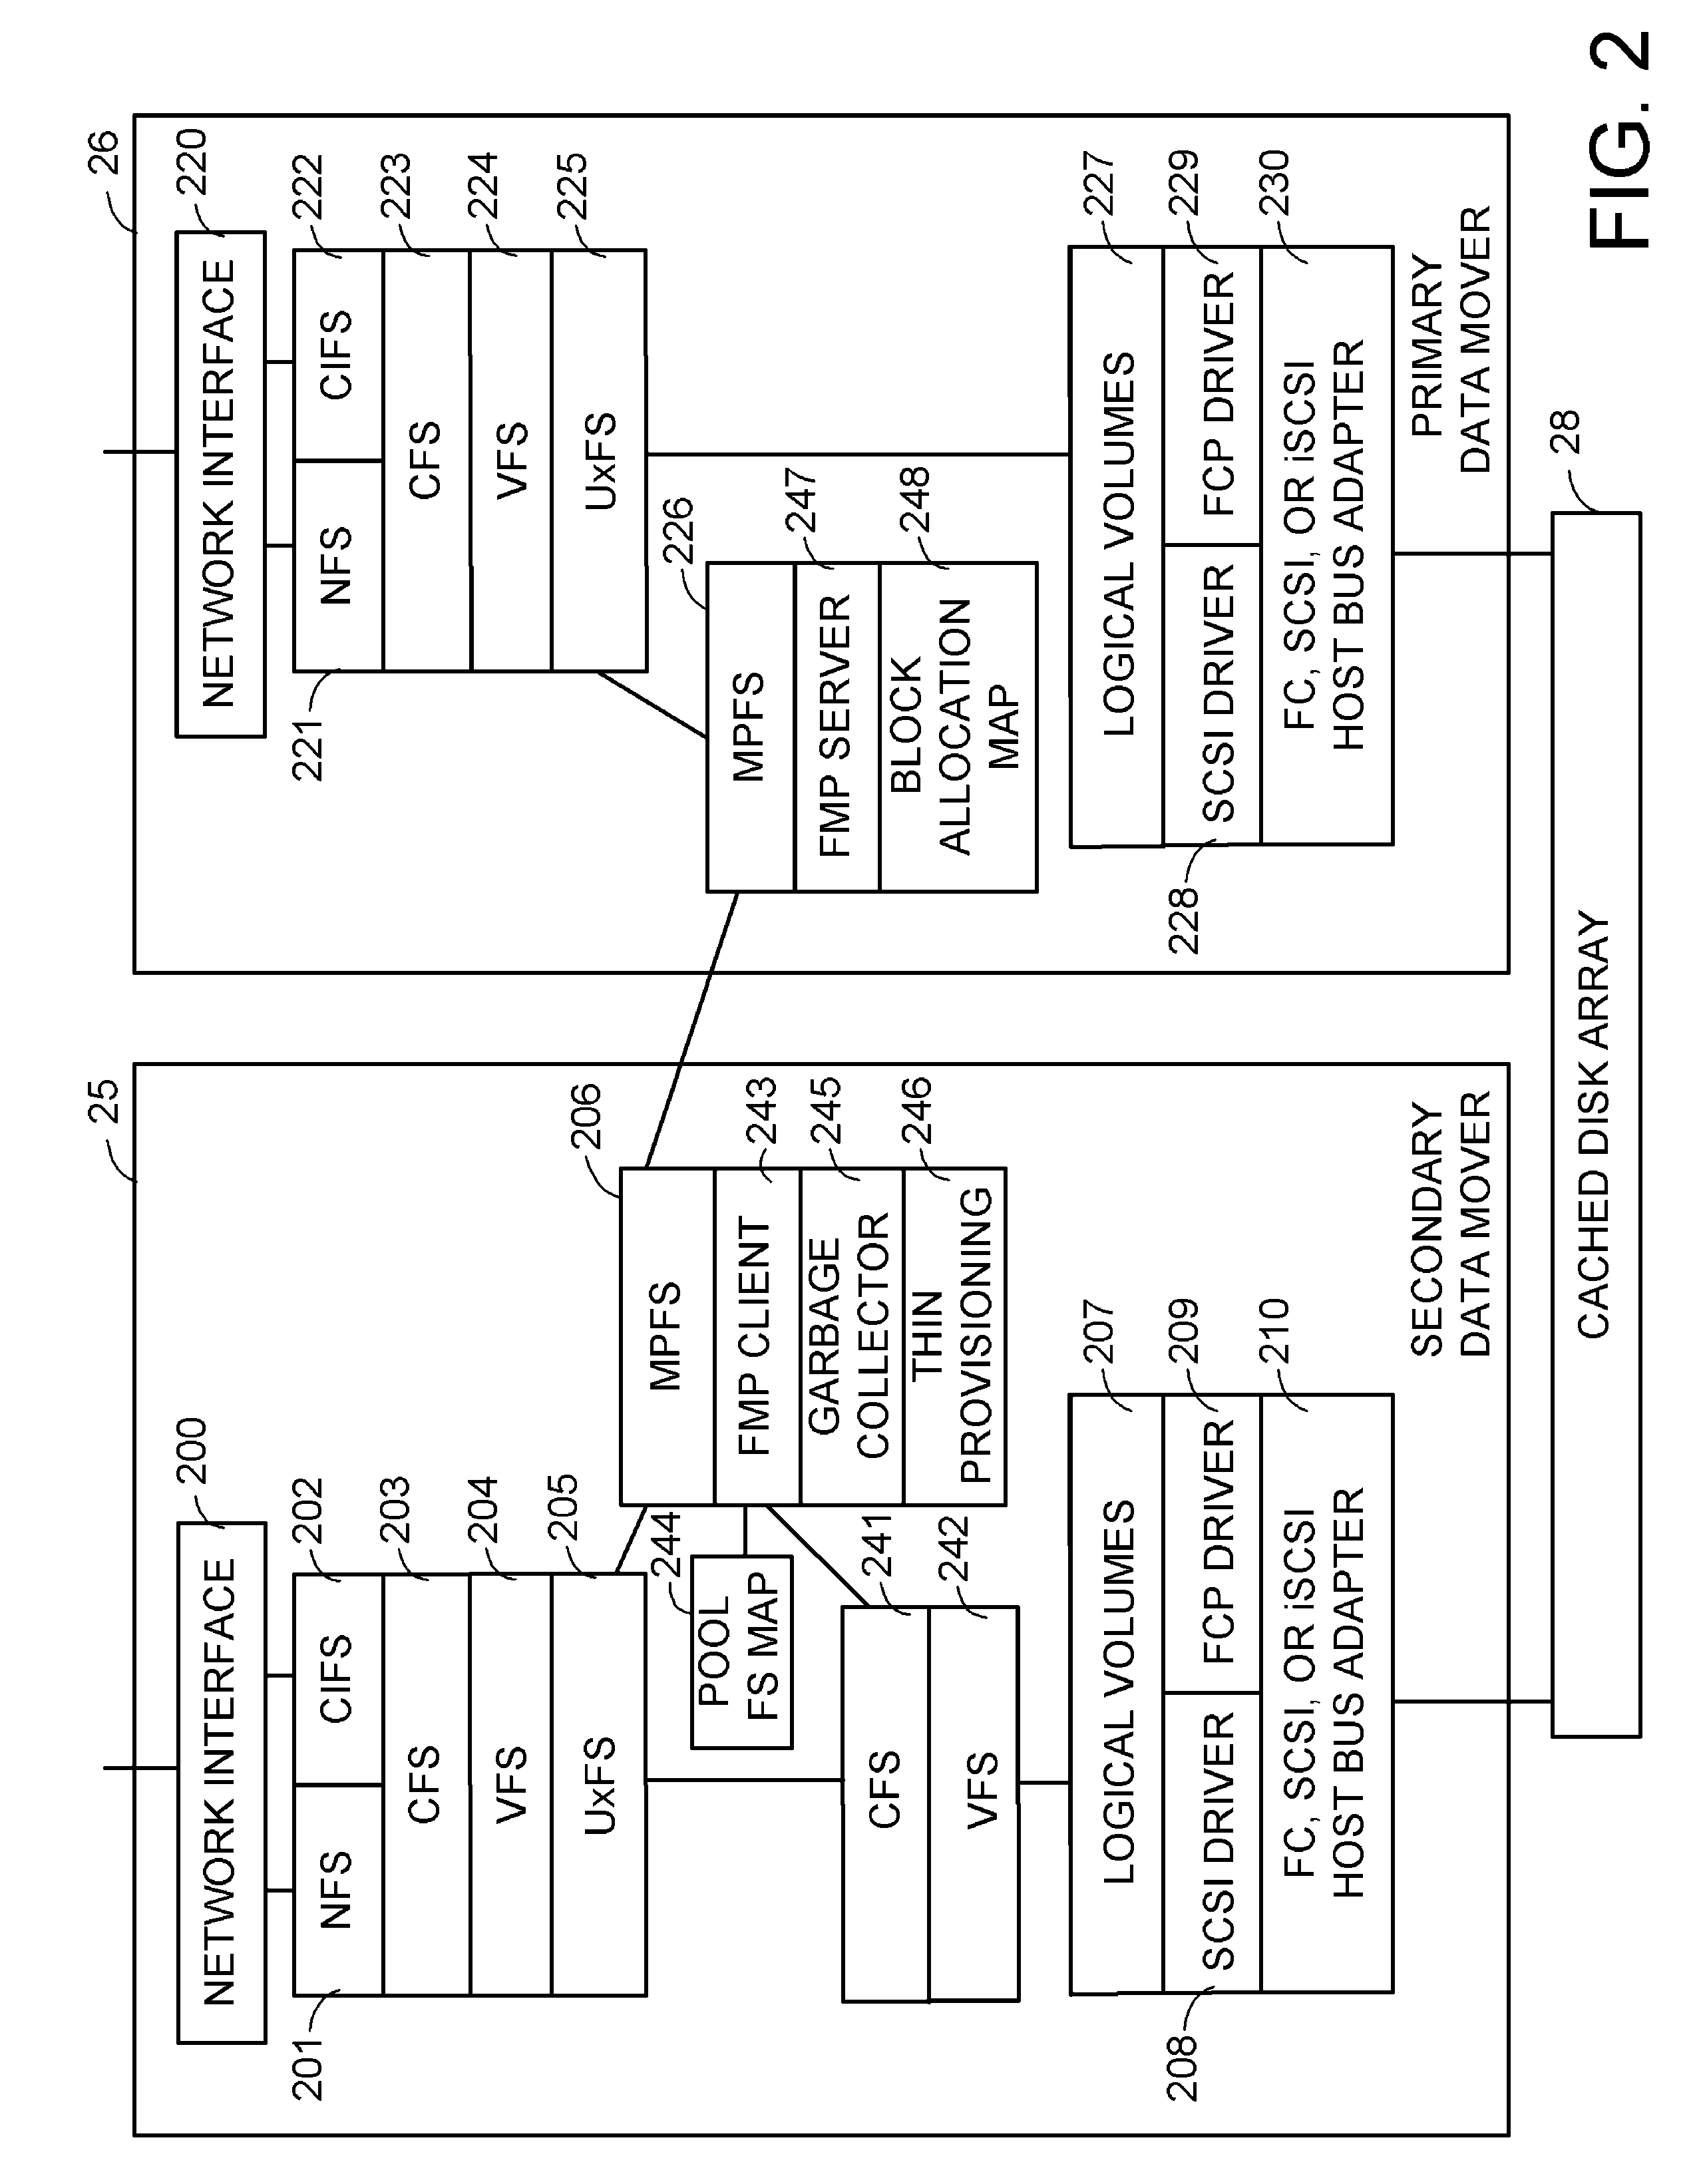 Pre-allocation and hierarchical mapping of data blocks distributed from a first processor to a second processor for use in a file system